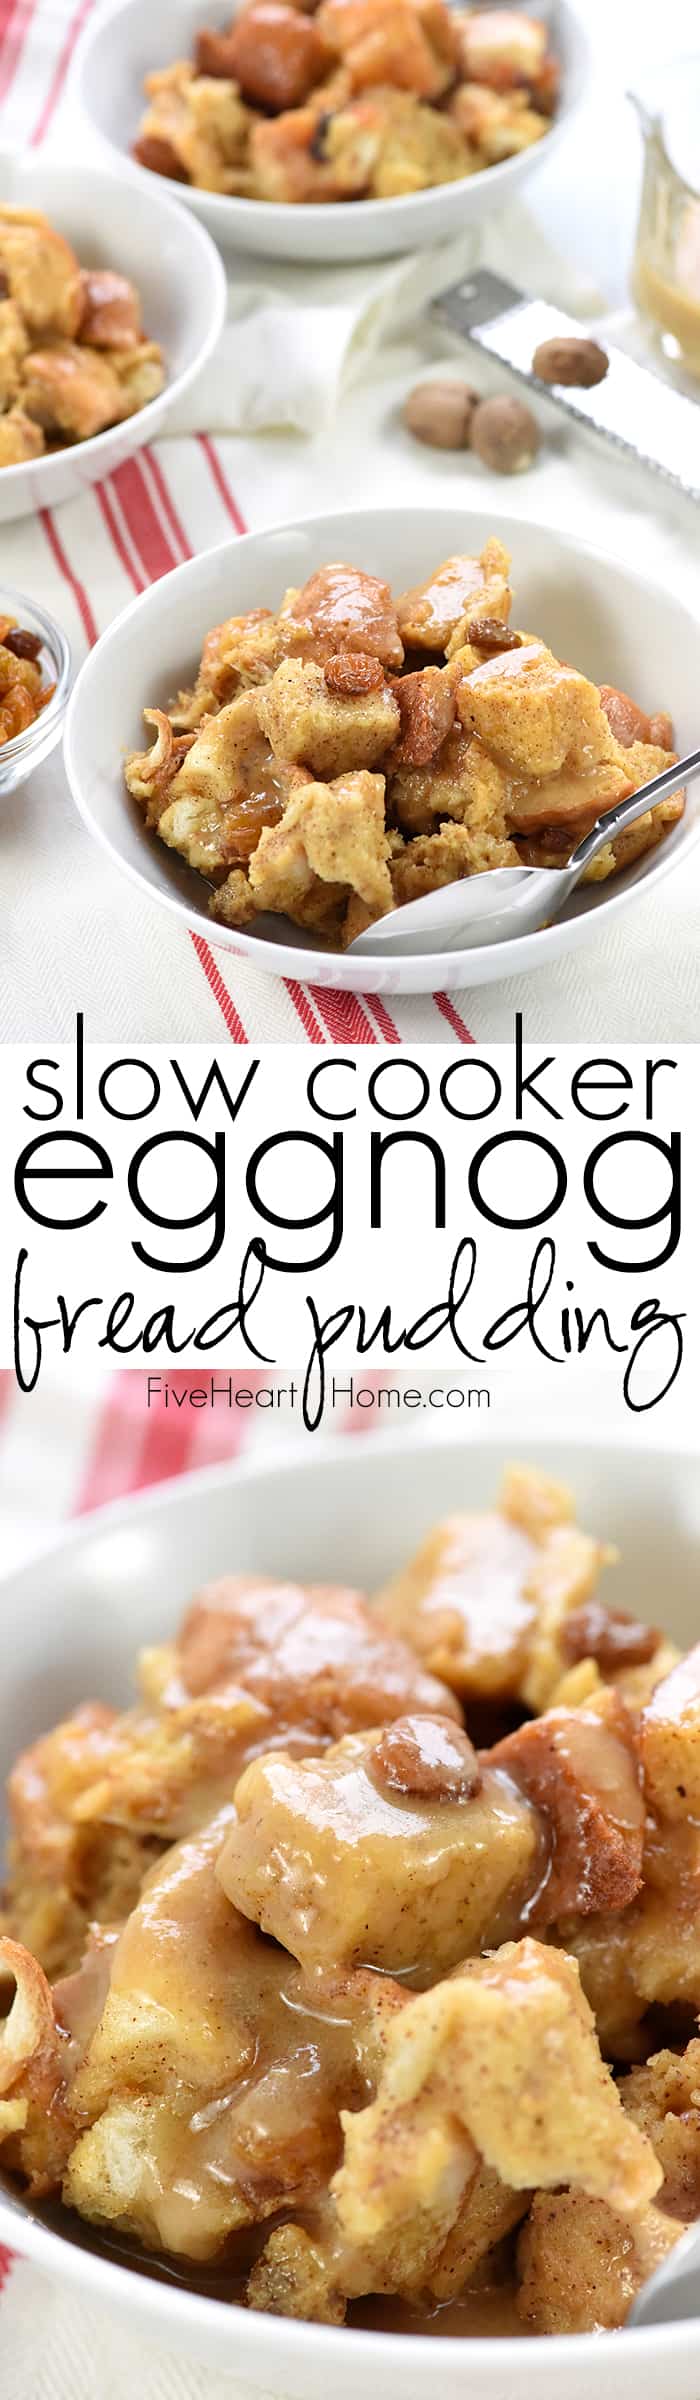 Slow Cooker Eggnog Bread Pudding ~ this decadent holiday breakfast, brunch, or dessert is studded with golden raisins, sprinkled with nutmeg, and drizzled with a silky eggnog syrup...and it effortlessly cooks up in the crock pot, freeing up the oven for other recipes! | FiveHeartHome.com via @fivehearthome